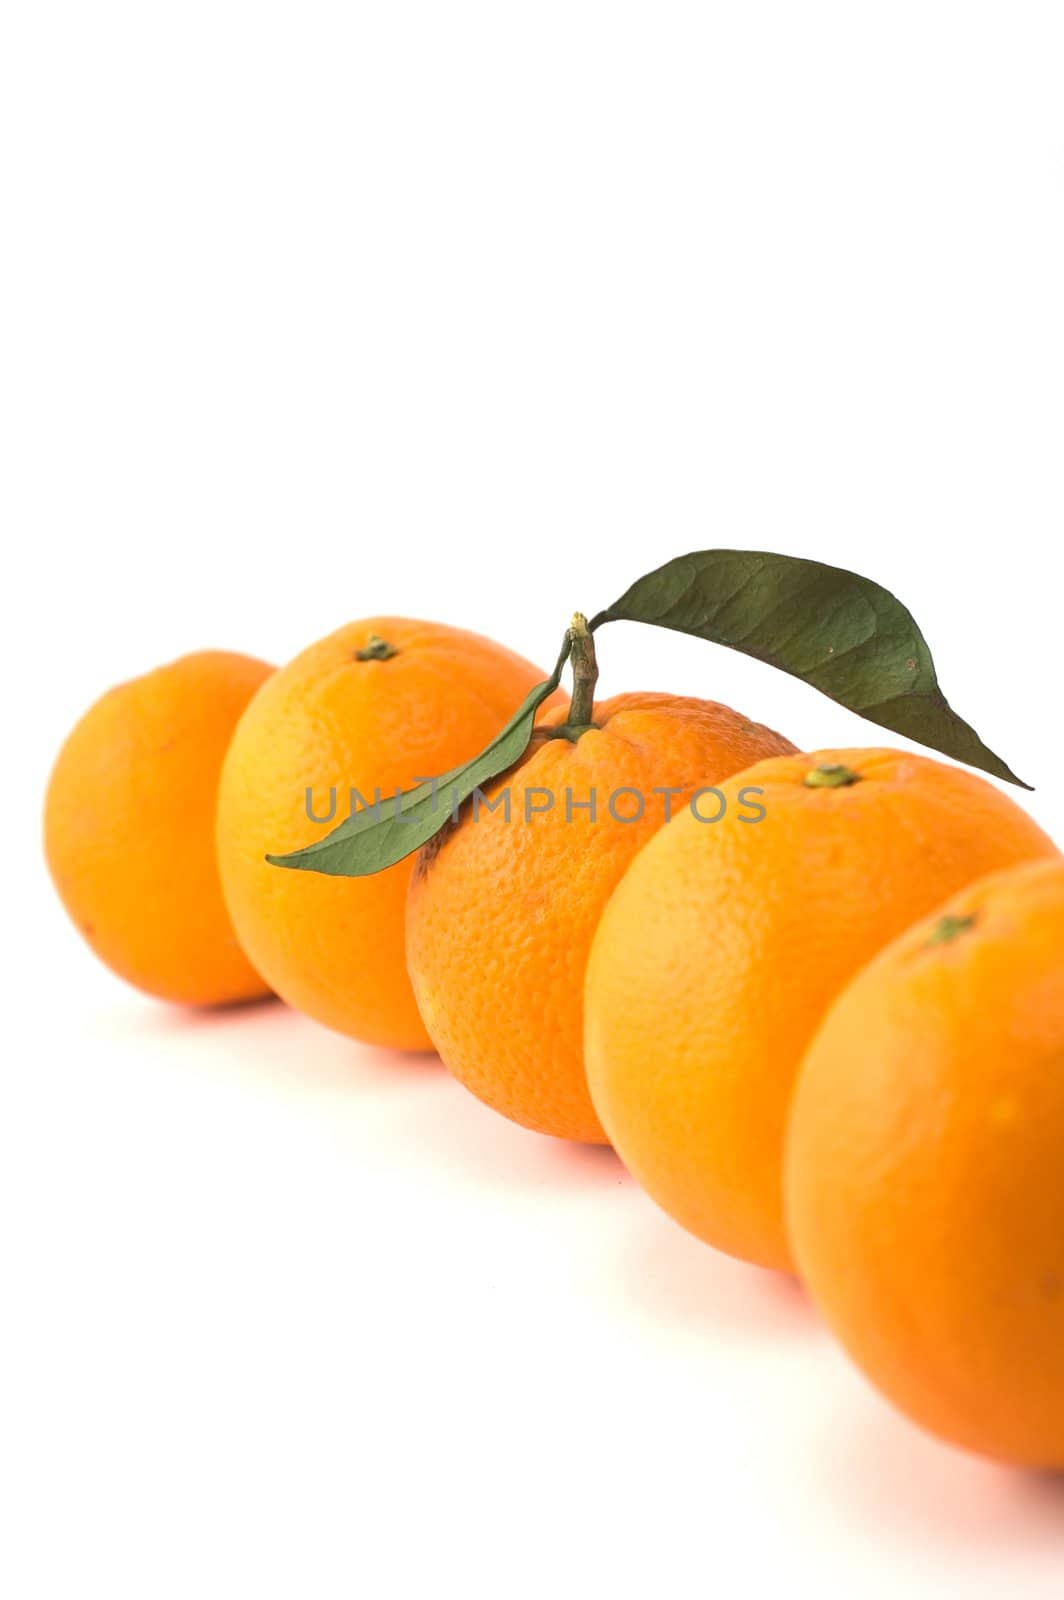 Oranges in a row isolated on white with selective focus on central orange